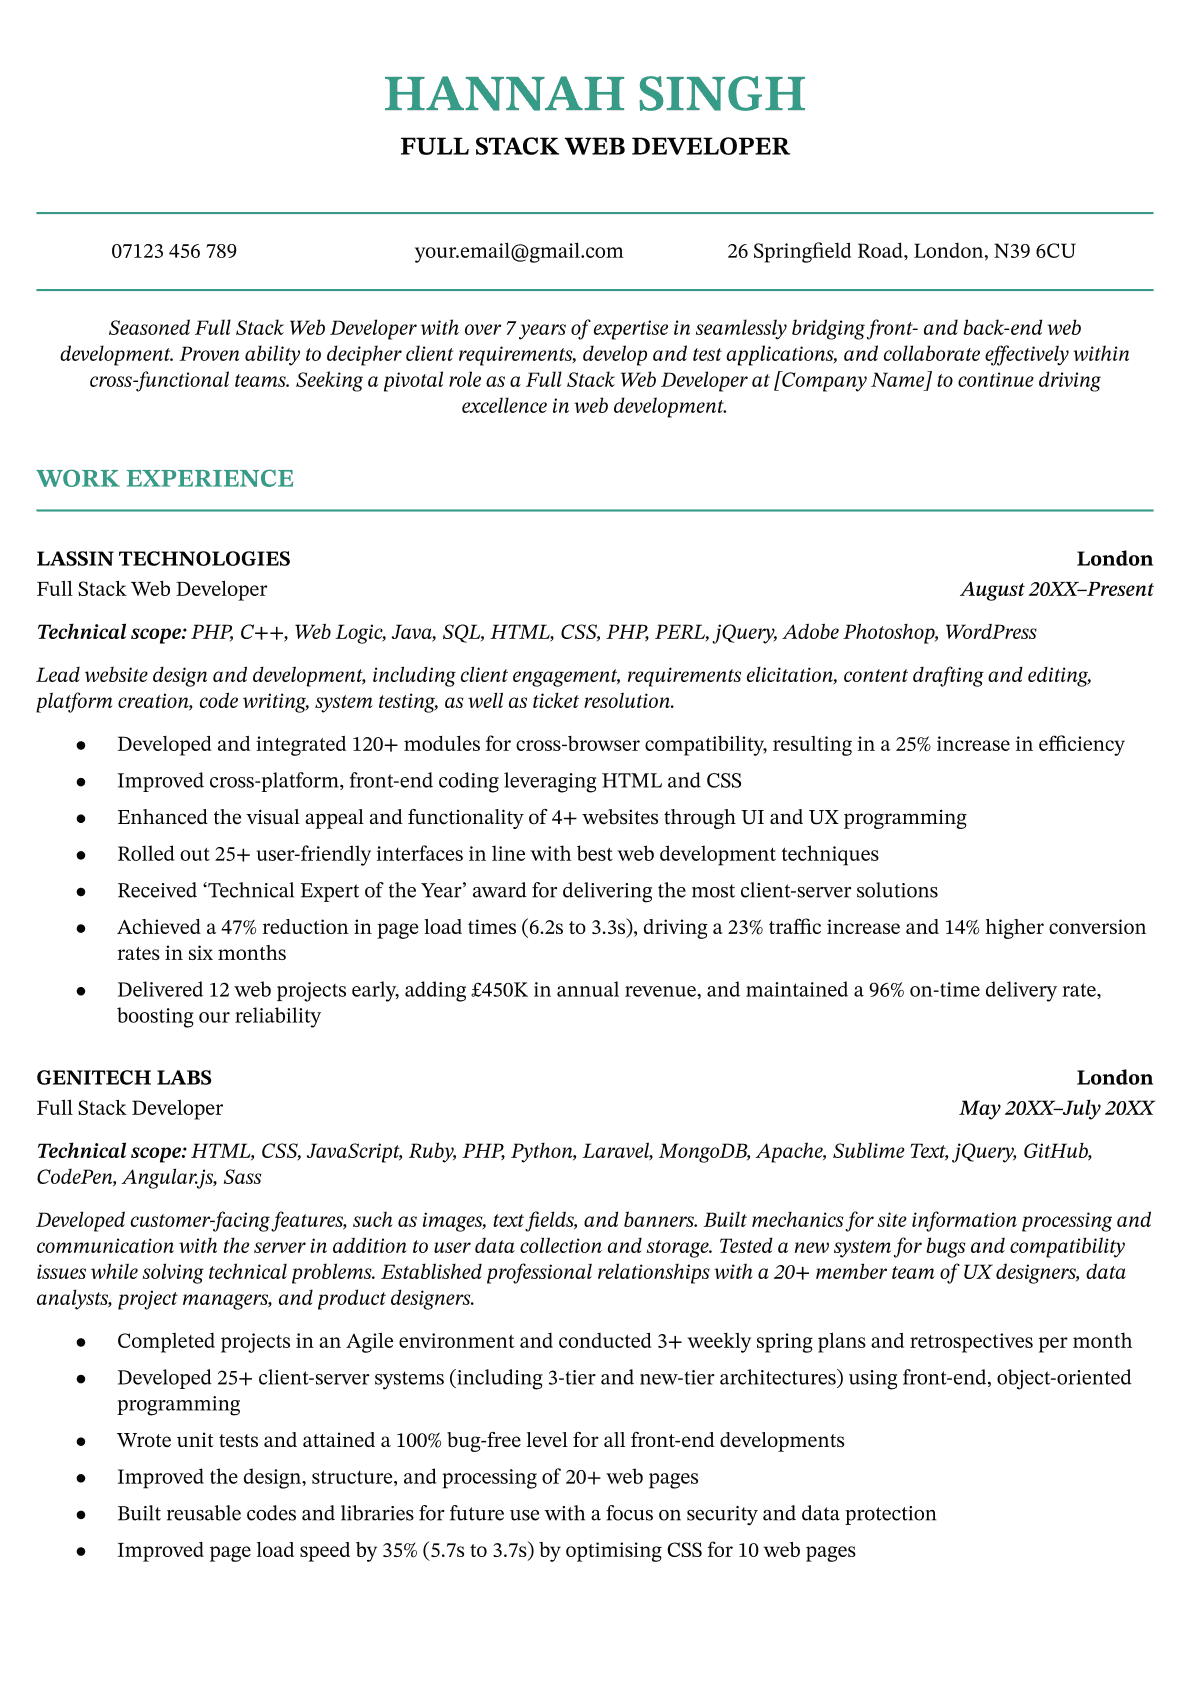 The Birmingham CV template in green (page one), which features strong lines to divide the sections on the page: CV header, contact details, personal statement, and work experience. Each work experience entry includes a paragraph of text to describe the applicant’s duties and bullet points to describe their achievements in the role.